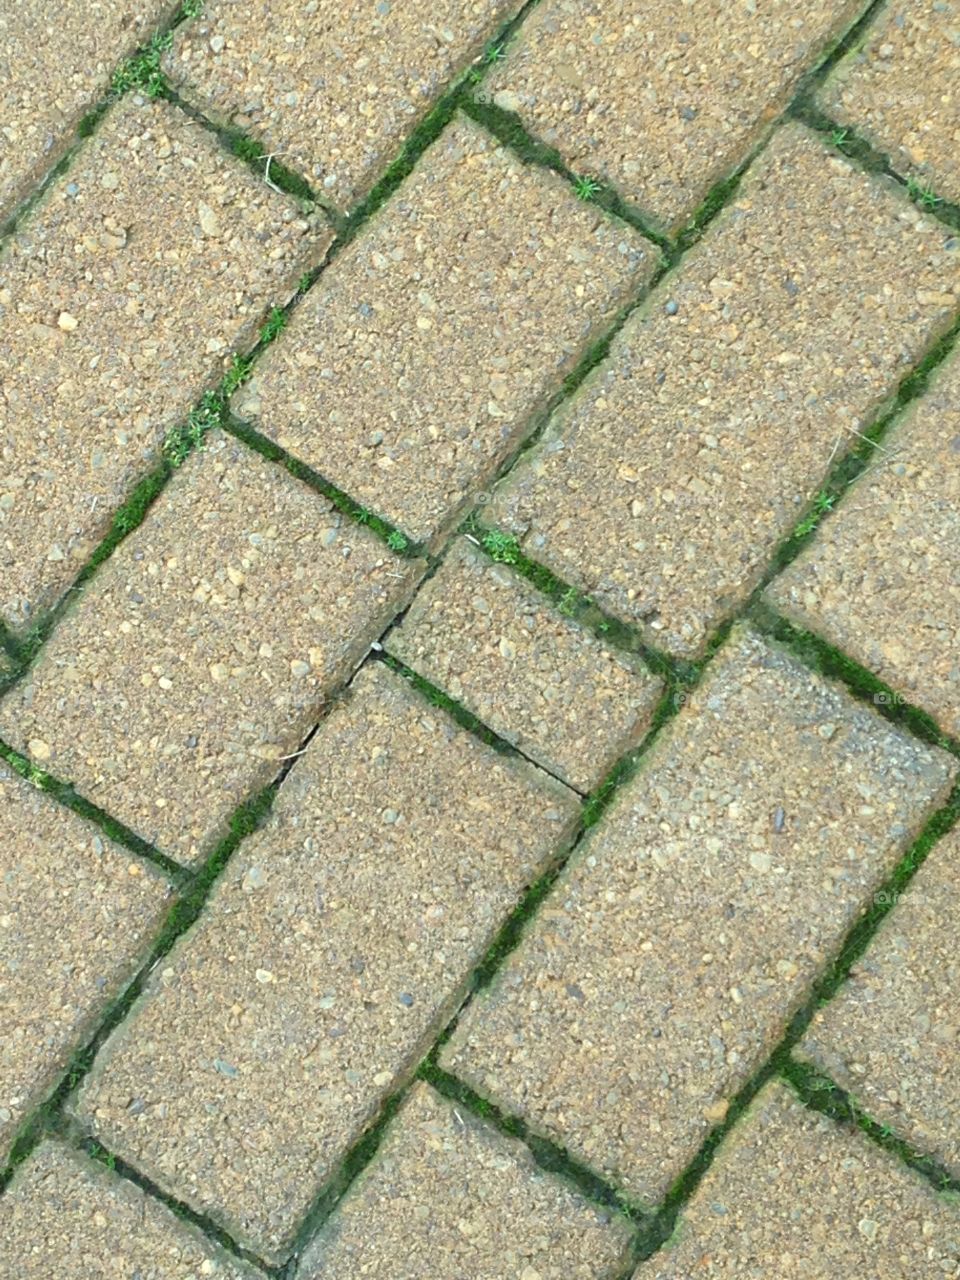 Cobblestone walkway with green grass in the cracks